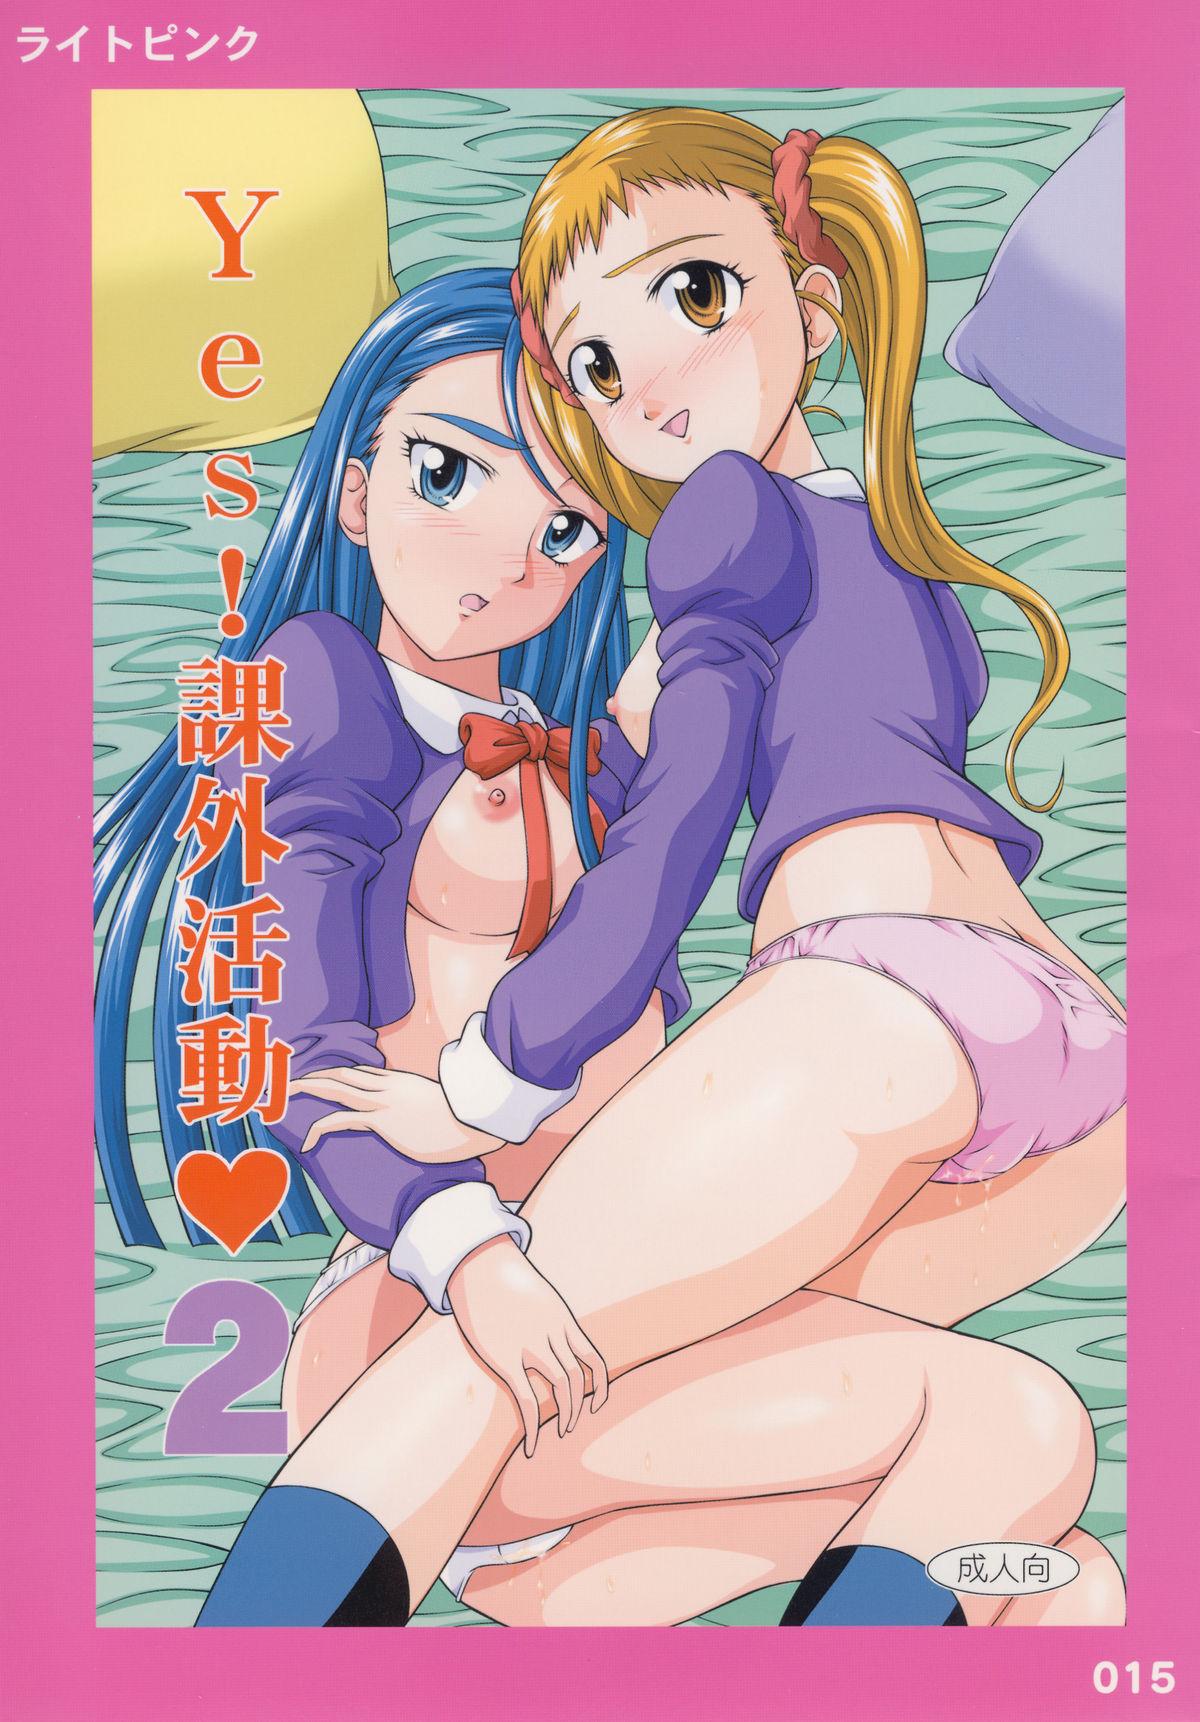 Sensual YES! Yes! Kagai Katsudou 2 - Pretty cure Yes precure 5 Letsdoeit - Picture 1